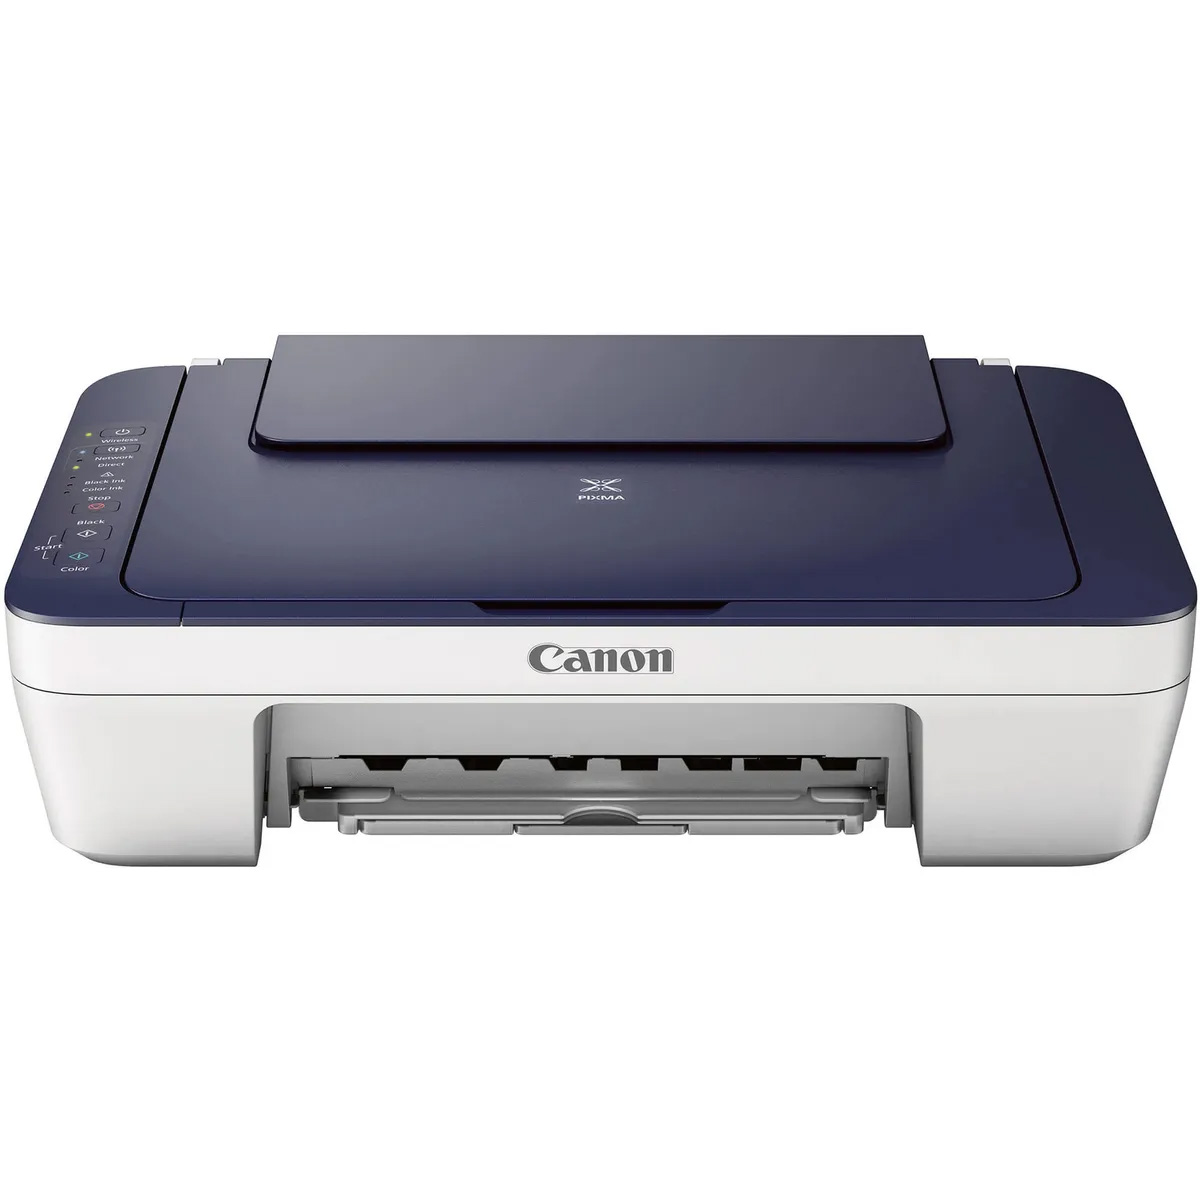 How To Install Driver For Canon Printer